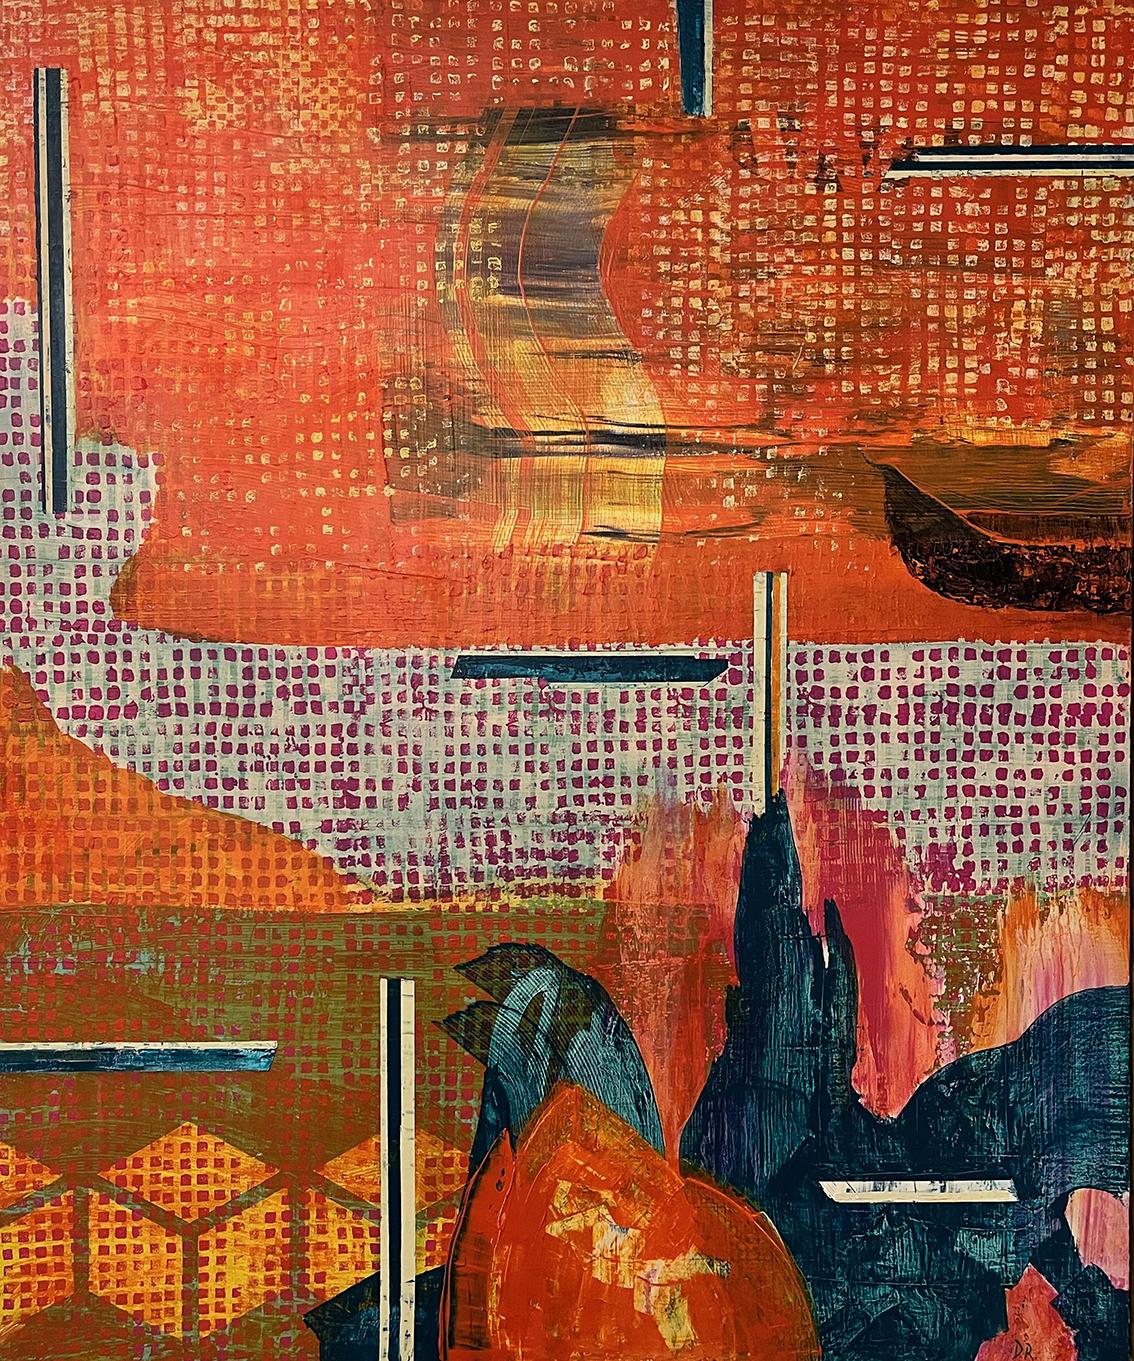 Large Orange Abstract Acrylic Painting on Plywood "Synchronous Change" - Mixed Media Art by Dave Robertson